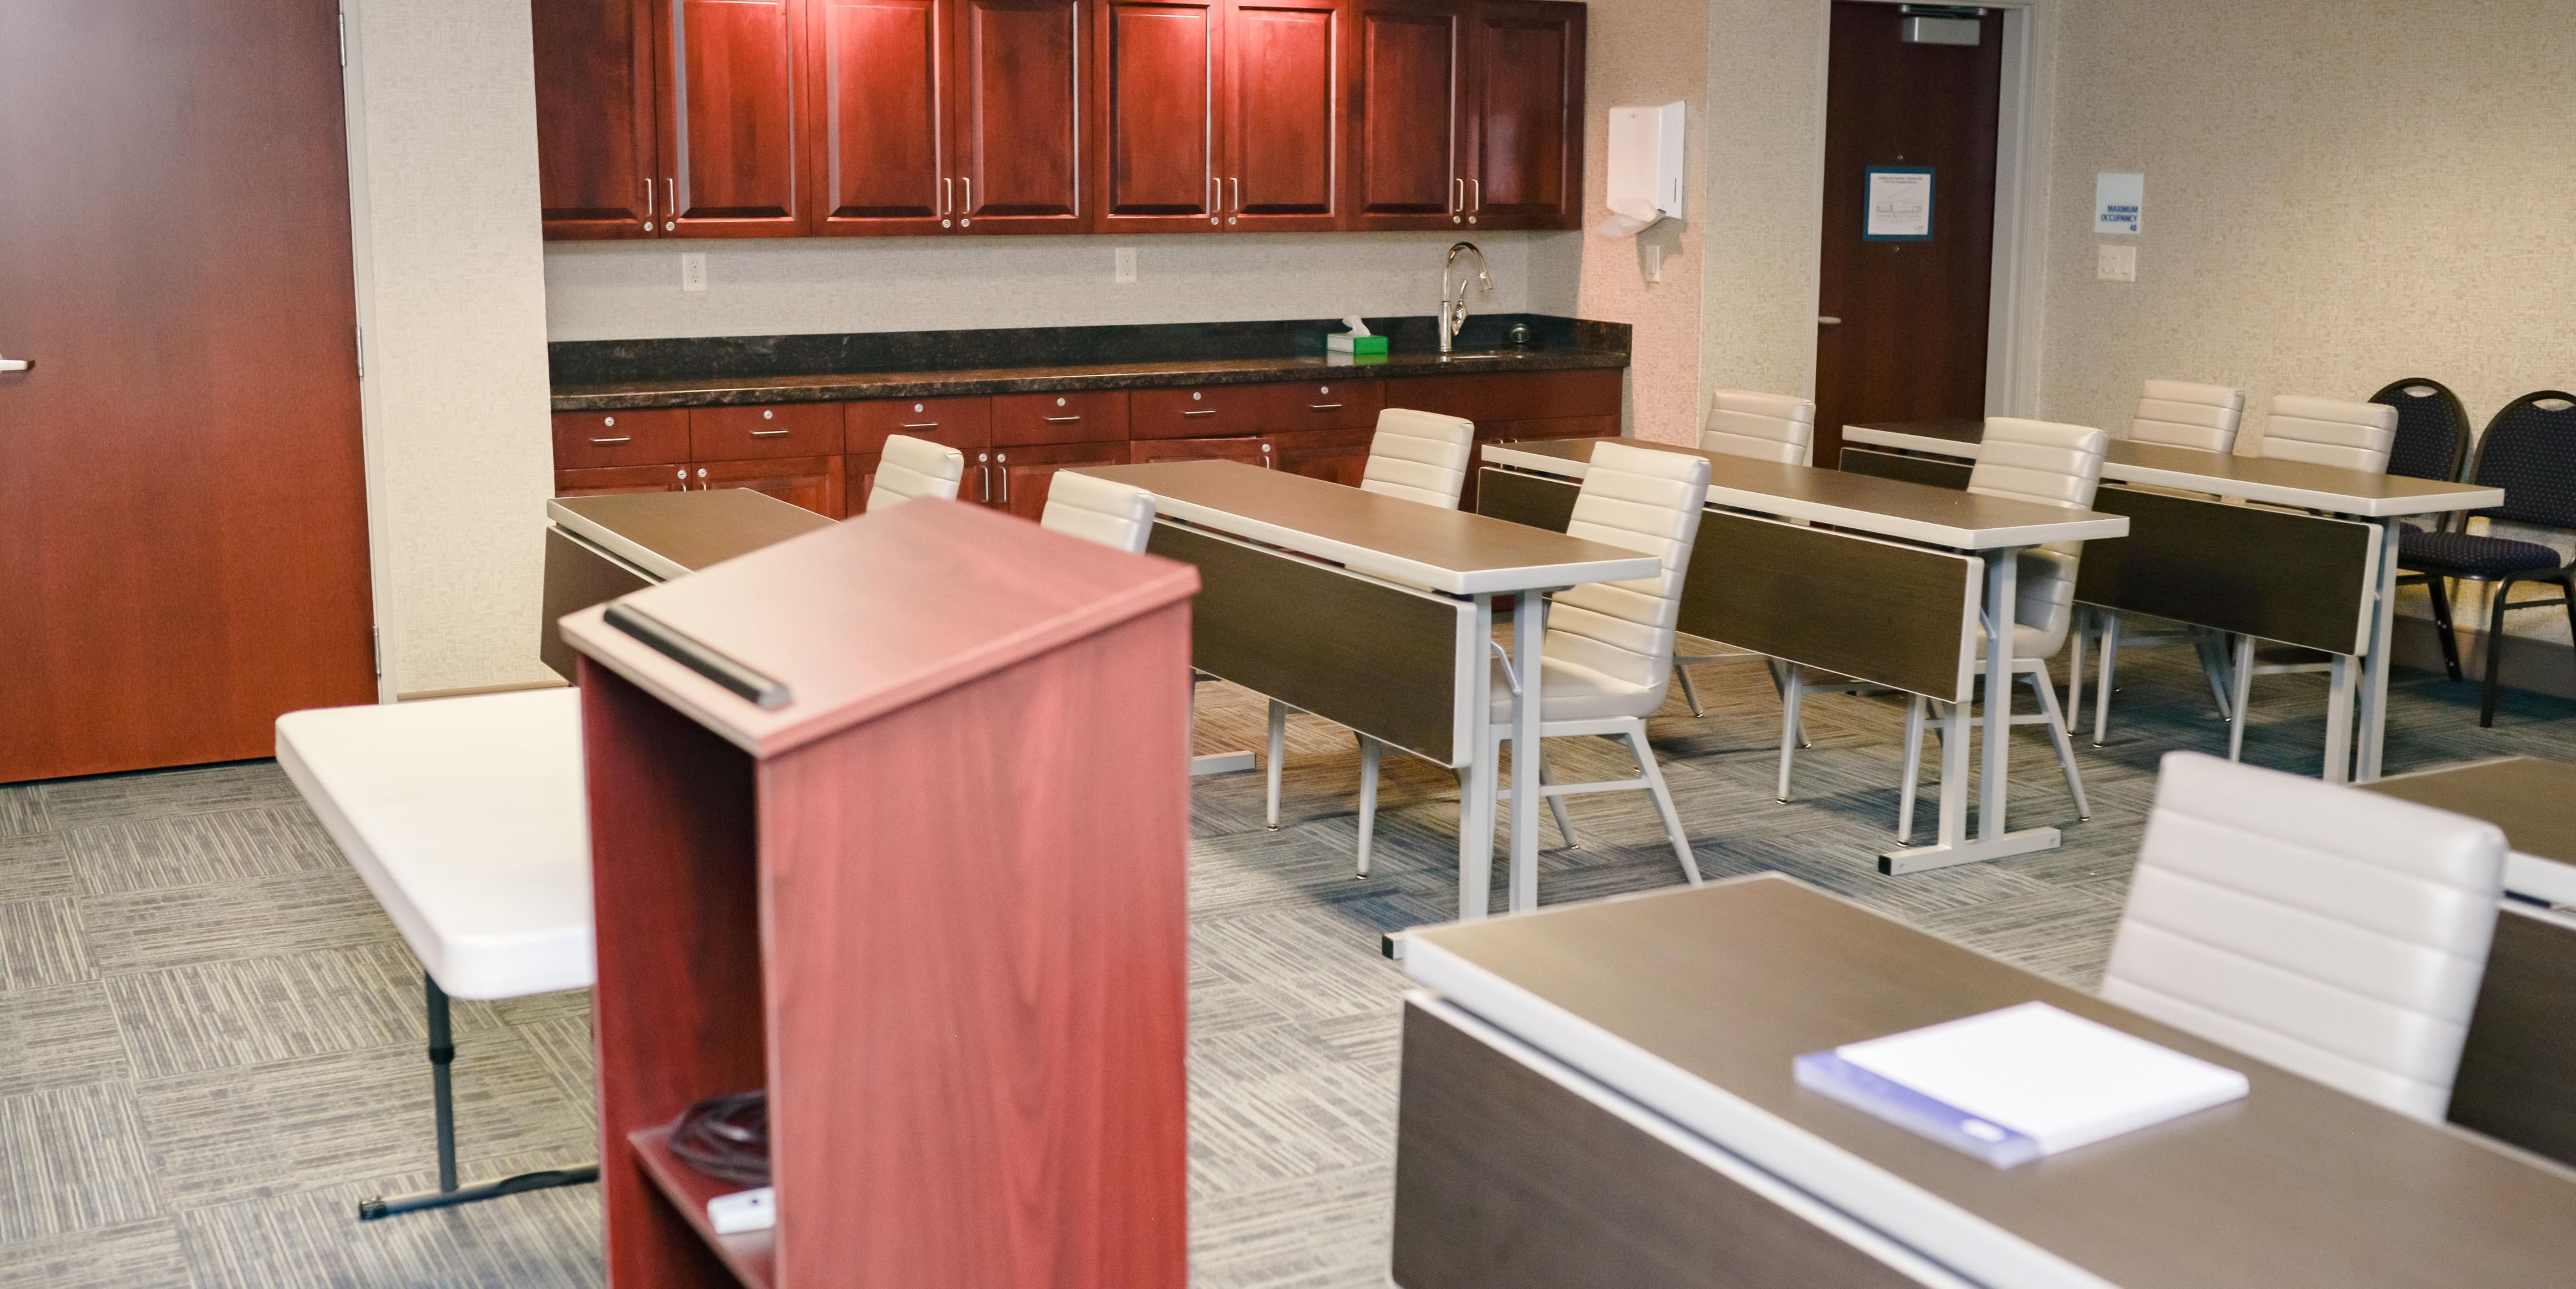 We have the perfect space for small meetings. If you're looking for a location with meeting space, you'll be glad to know that we offer a conference room that can accommodate up to 40 people. Meeting space includes free wireless Internet access and we can also arrange for catering.